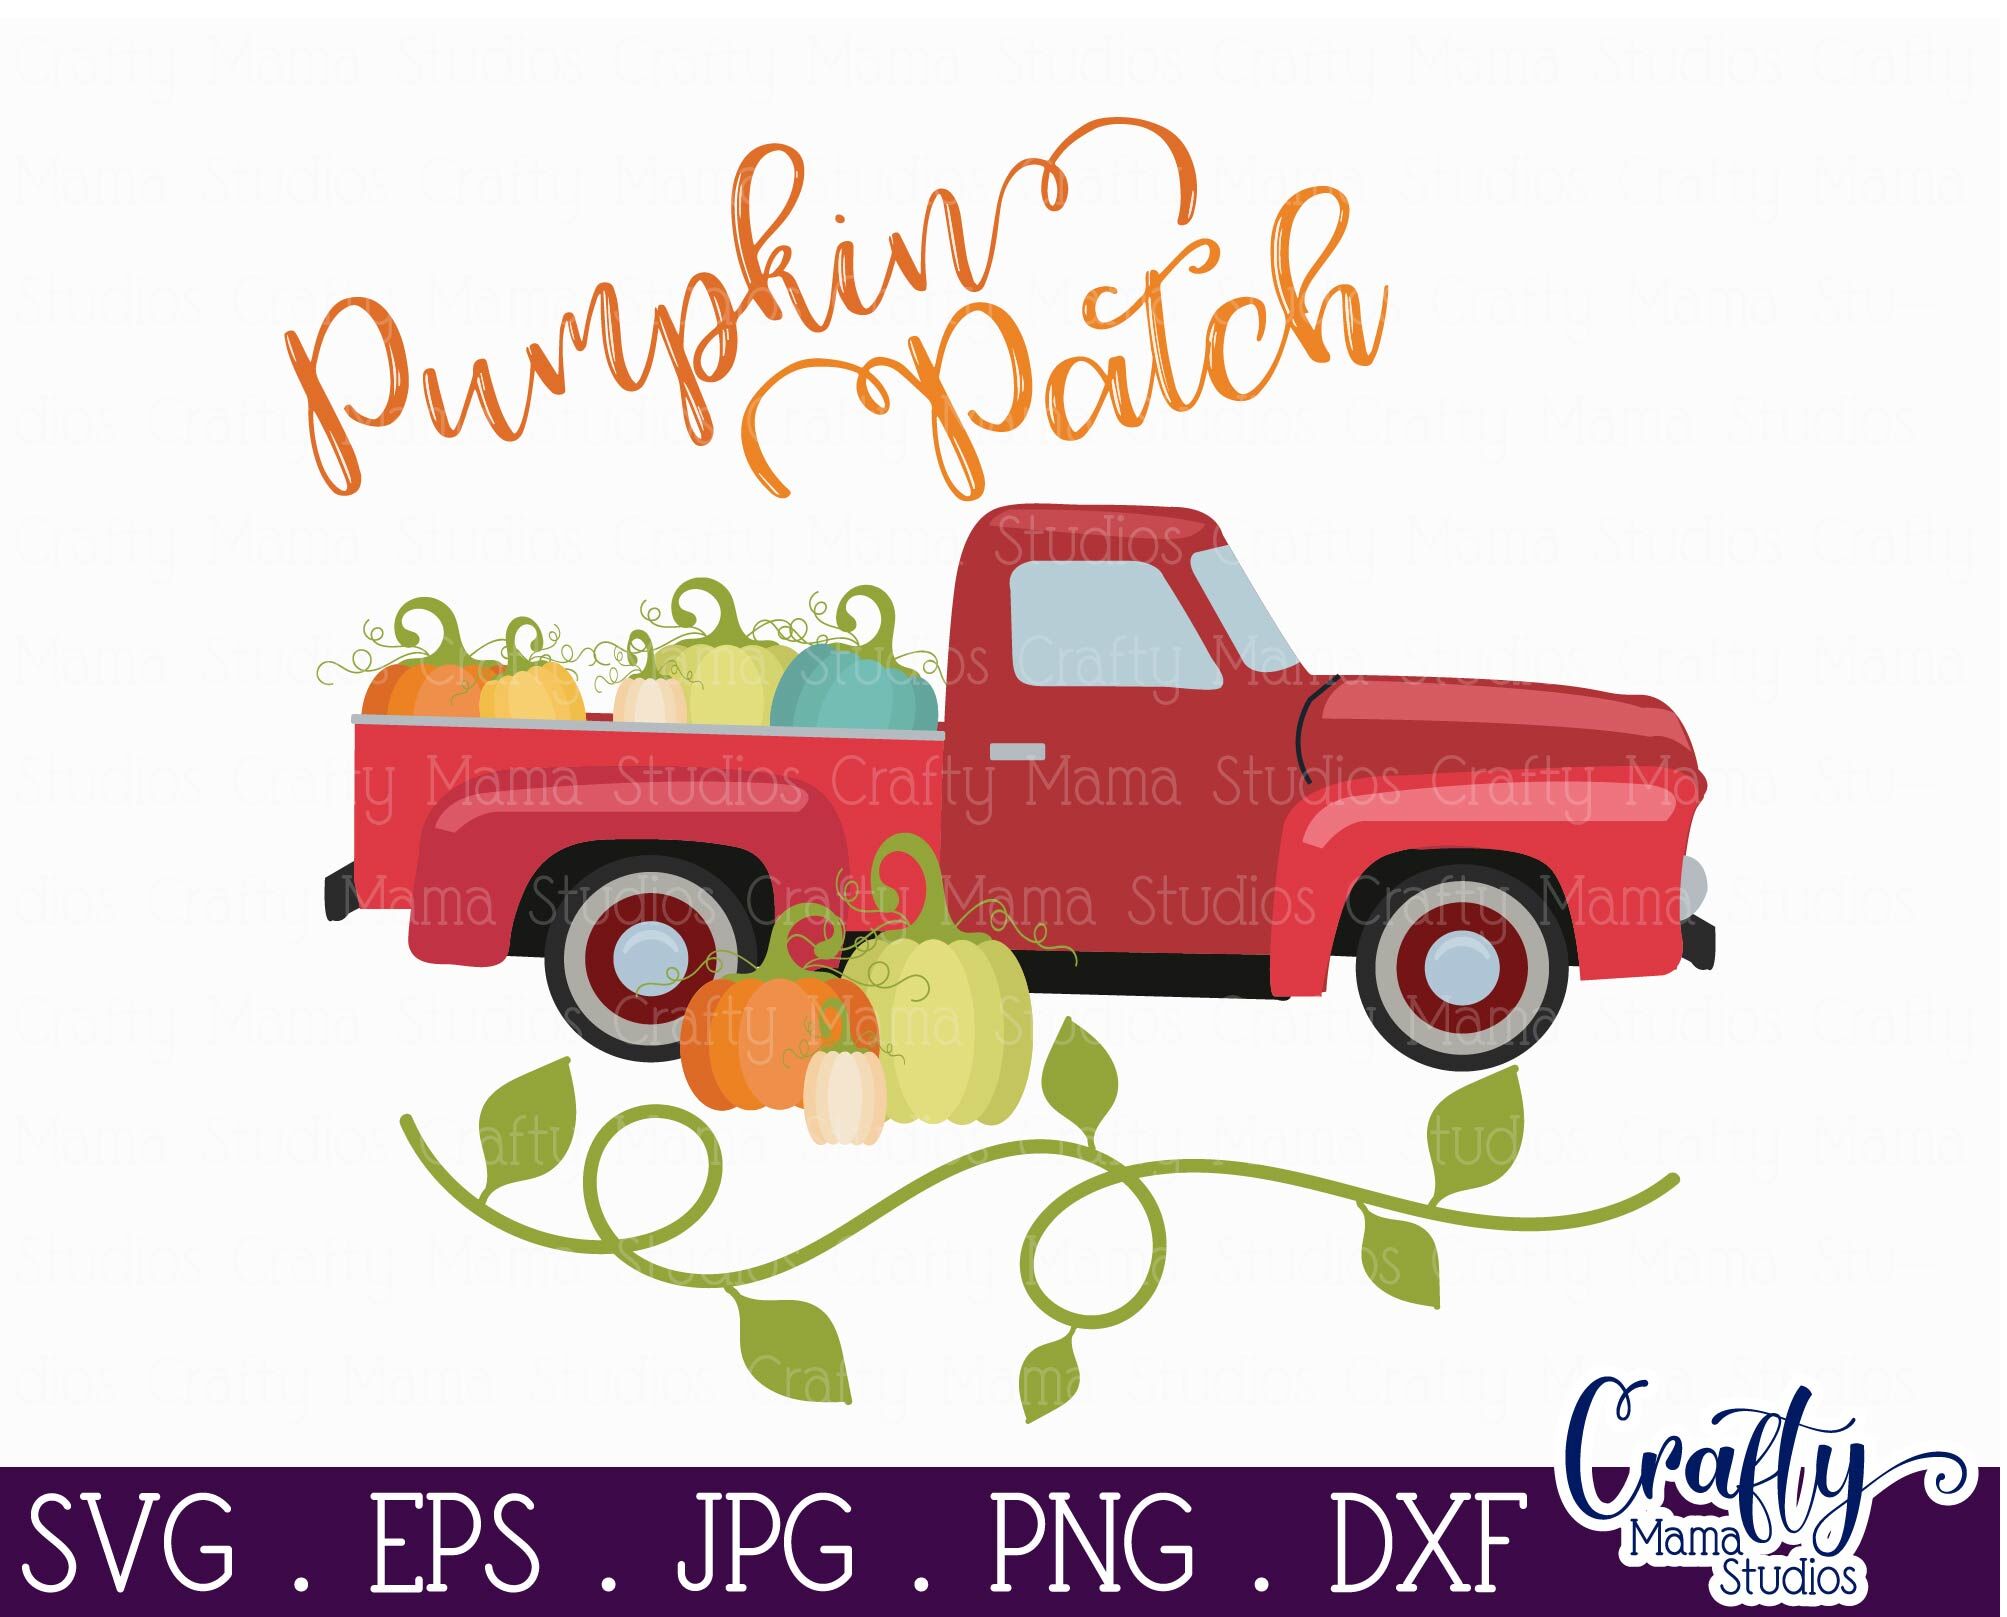 Download Pumpkin Patch Vintage Truck Svg By Crafty Mama Studios Thehungryjpeg Com